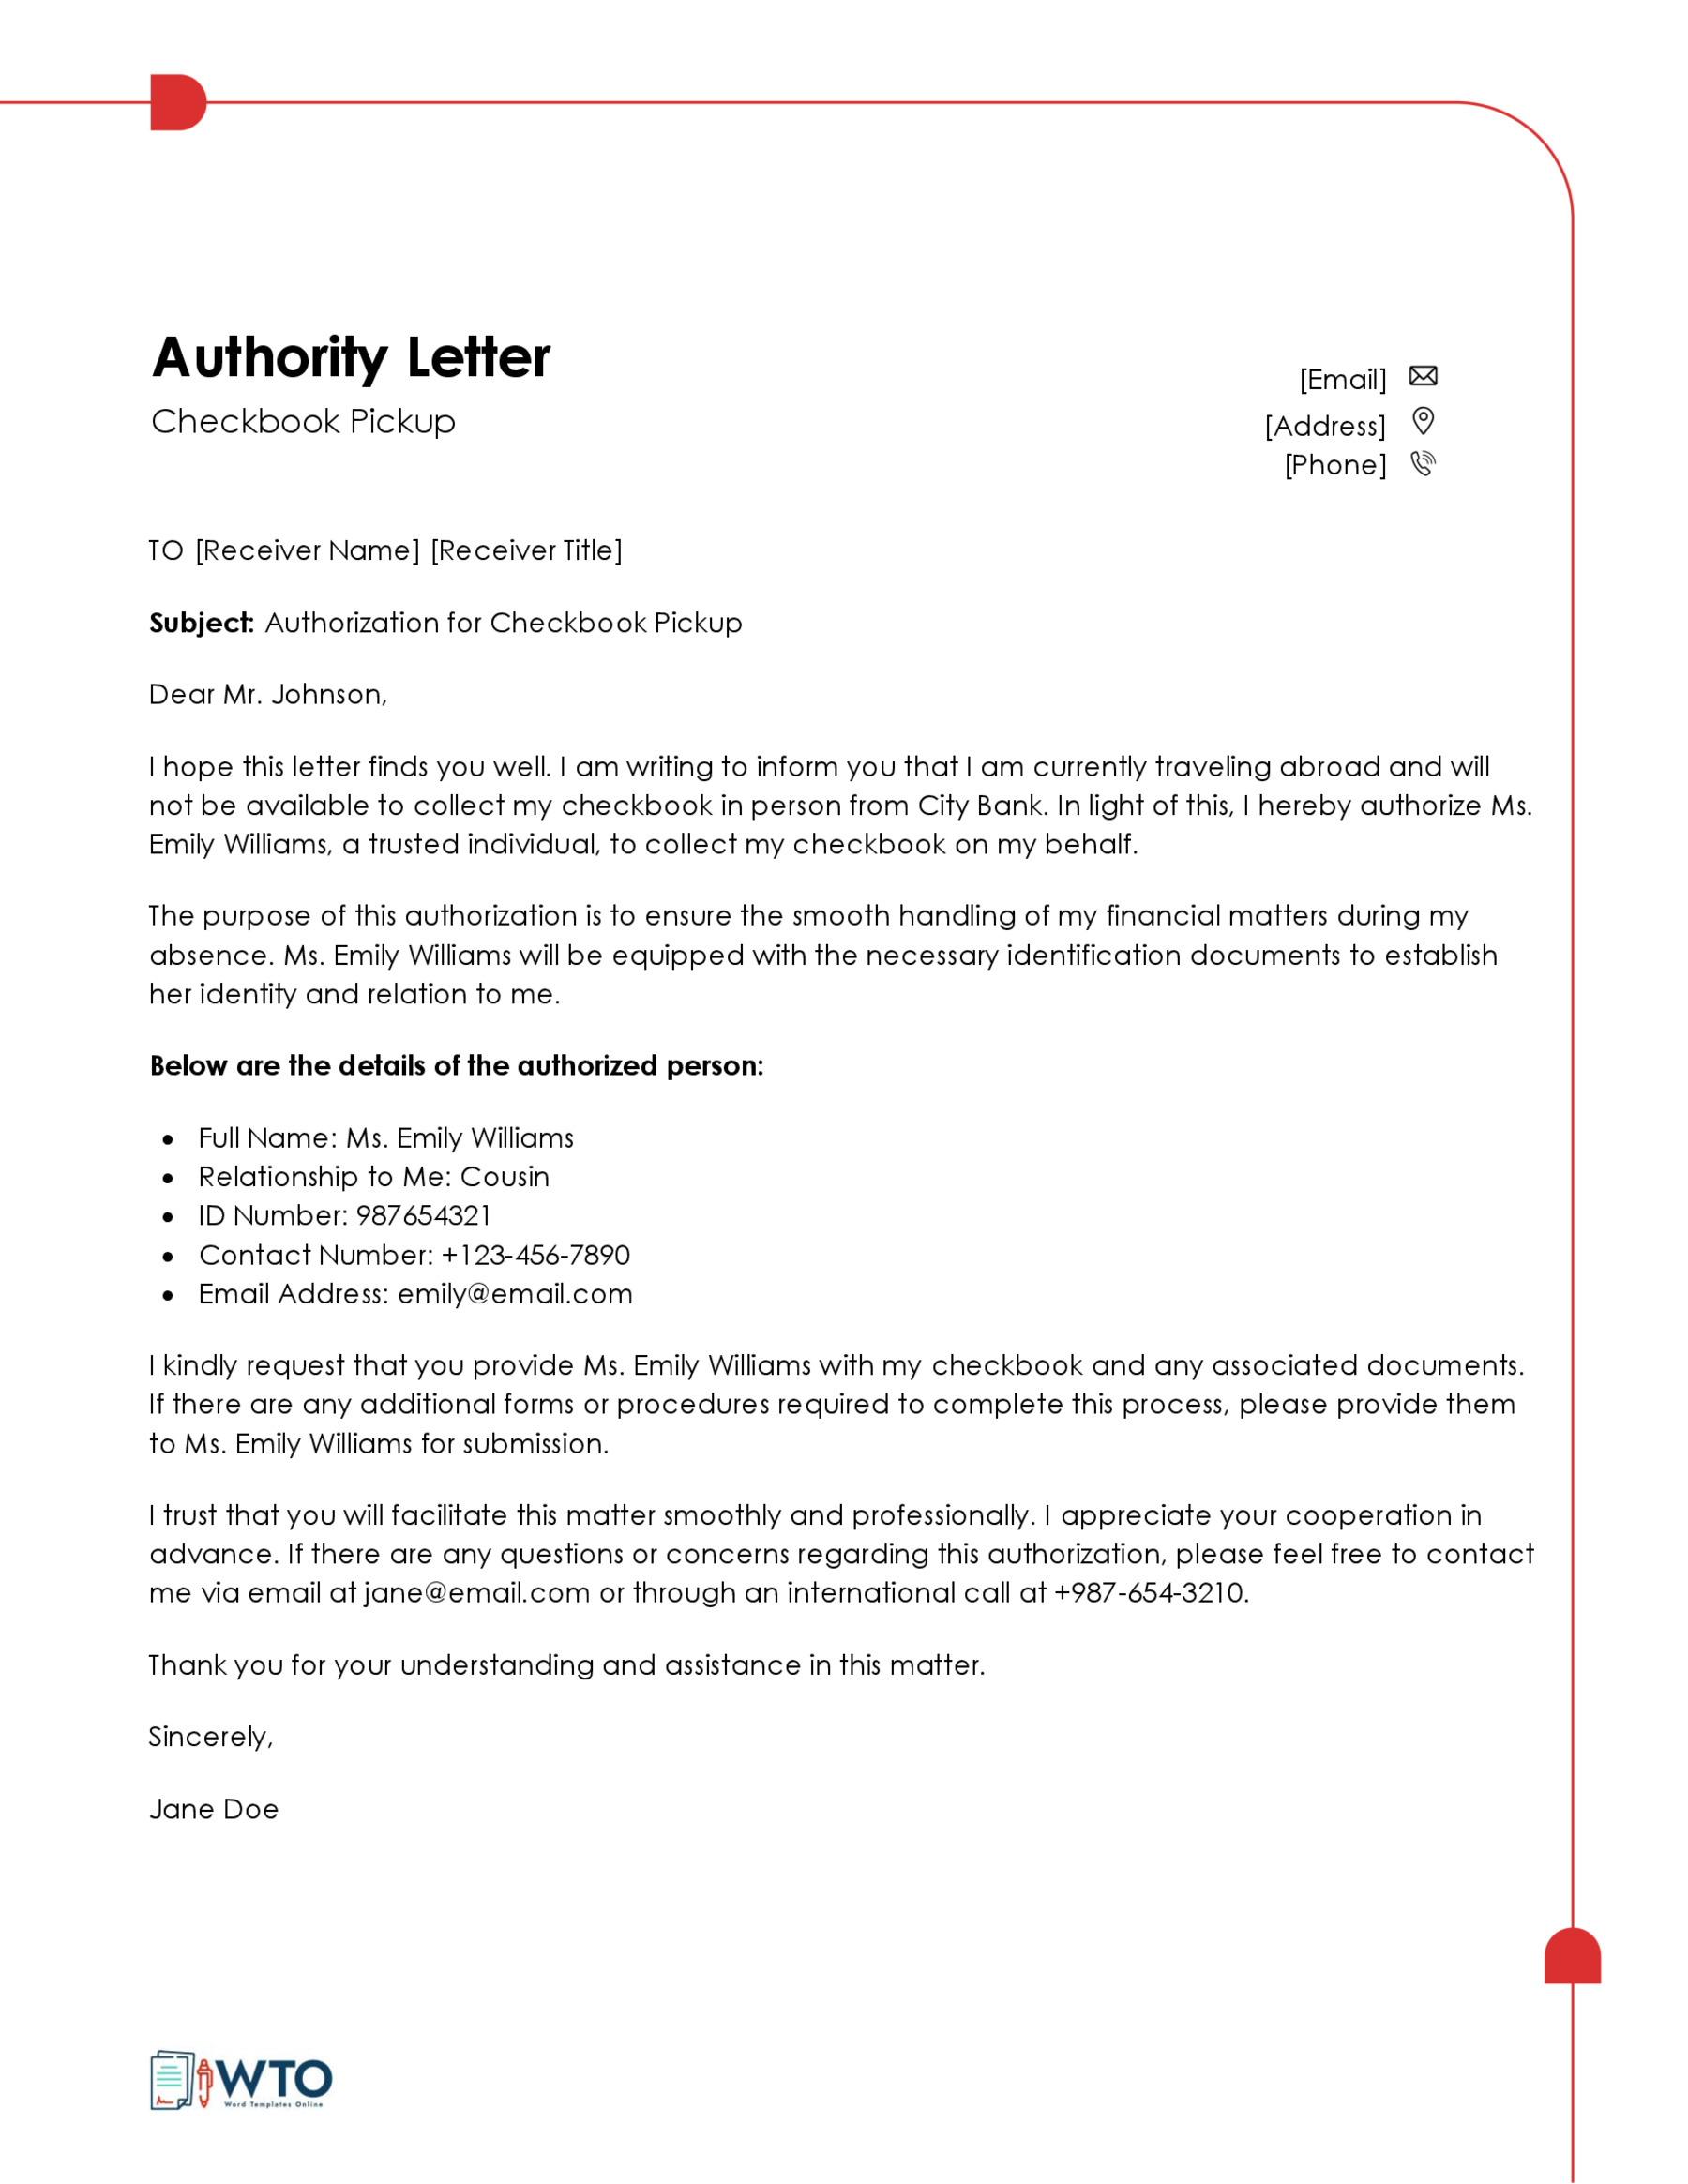 Sample Writing an Authorization Letter for Checkbook Pickup-Free Download